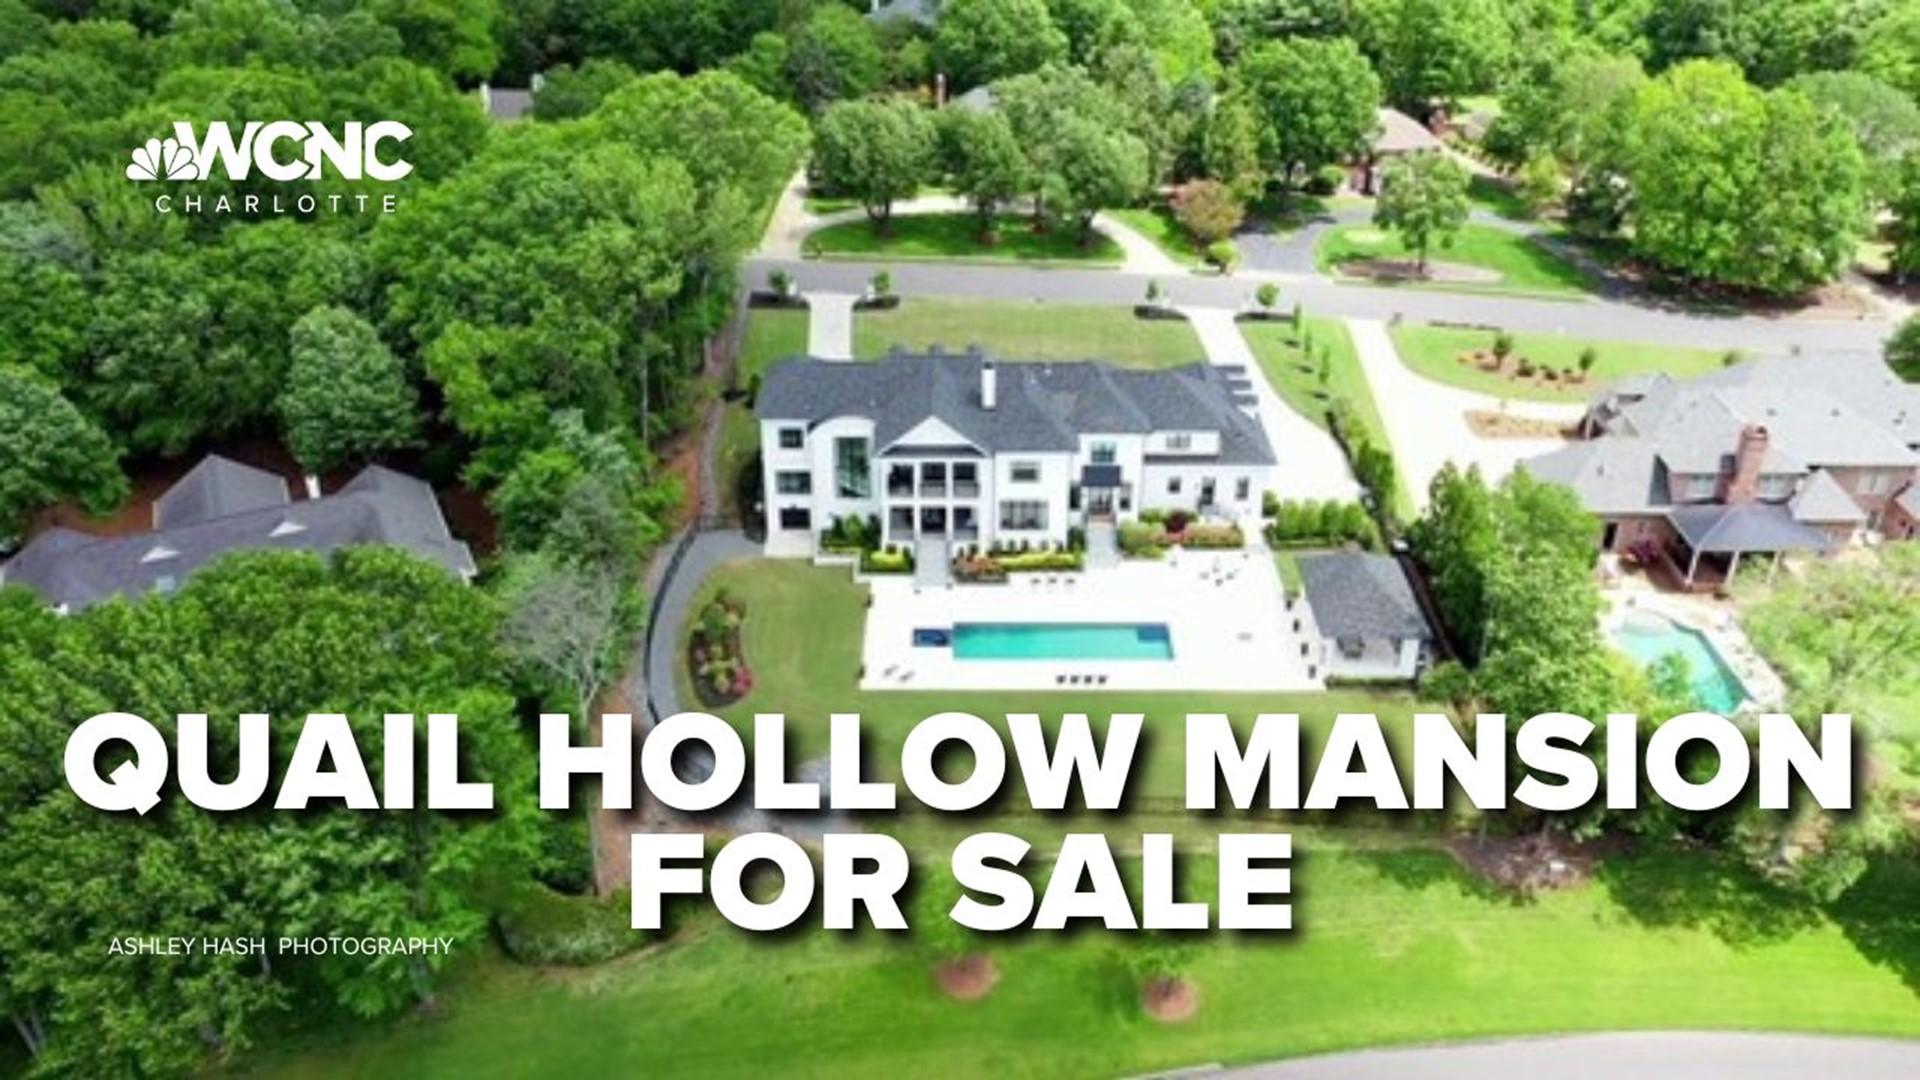 A 7,901-square-foot home overlooking the 15th hole at Quail Hollow Club hit the market for $8.5 million. Here's how the owner got everyone's attention.